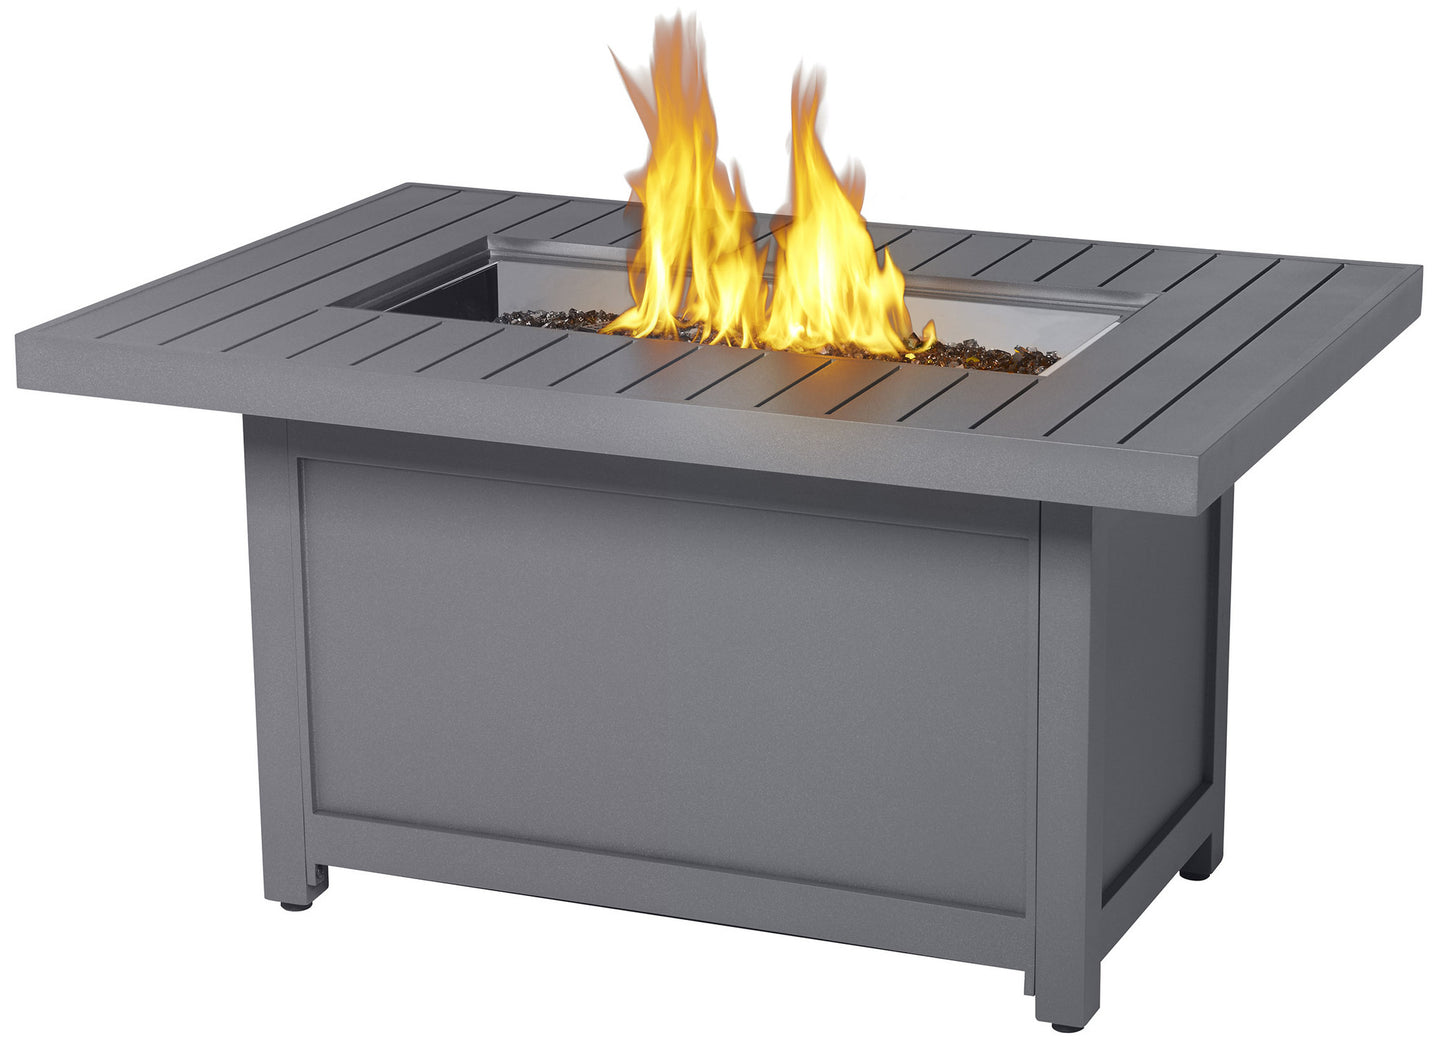 Napoleon Hampton Patio Flame Rectangular Fire Table is grey in colour with an overhanging tabletop. The tabletop is lain down with identical rectangular pieces side-by-side. This fire table can be bought at Barbecues Galore in Calgary, Alberta and the greater Toronto Area in Burlington, Oakville and Etobicoke.